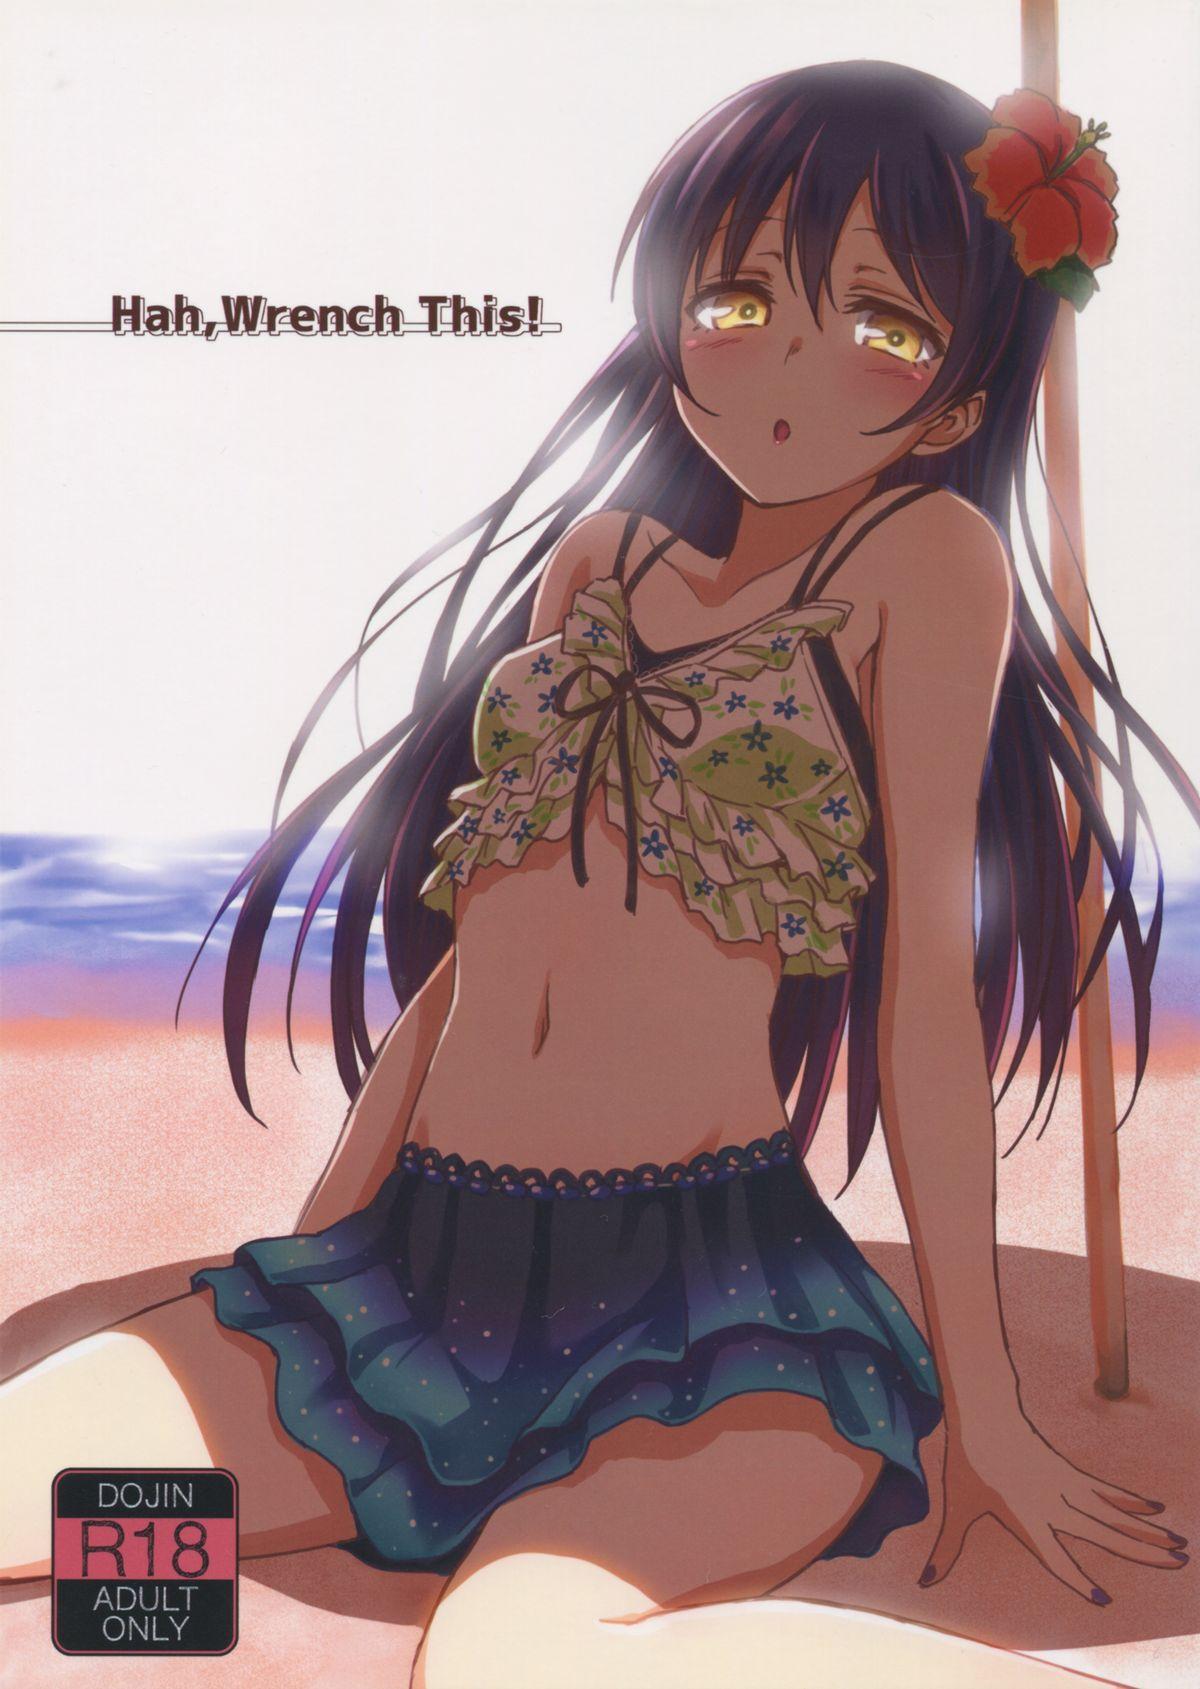 Throatfuck Hah,Wrench This! - Love live Head - Page 2